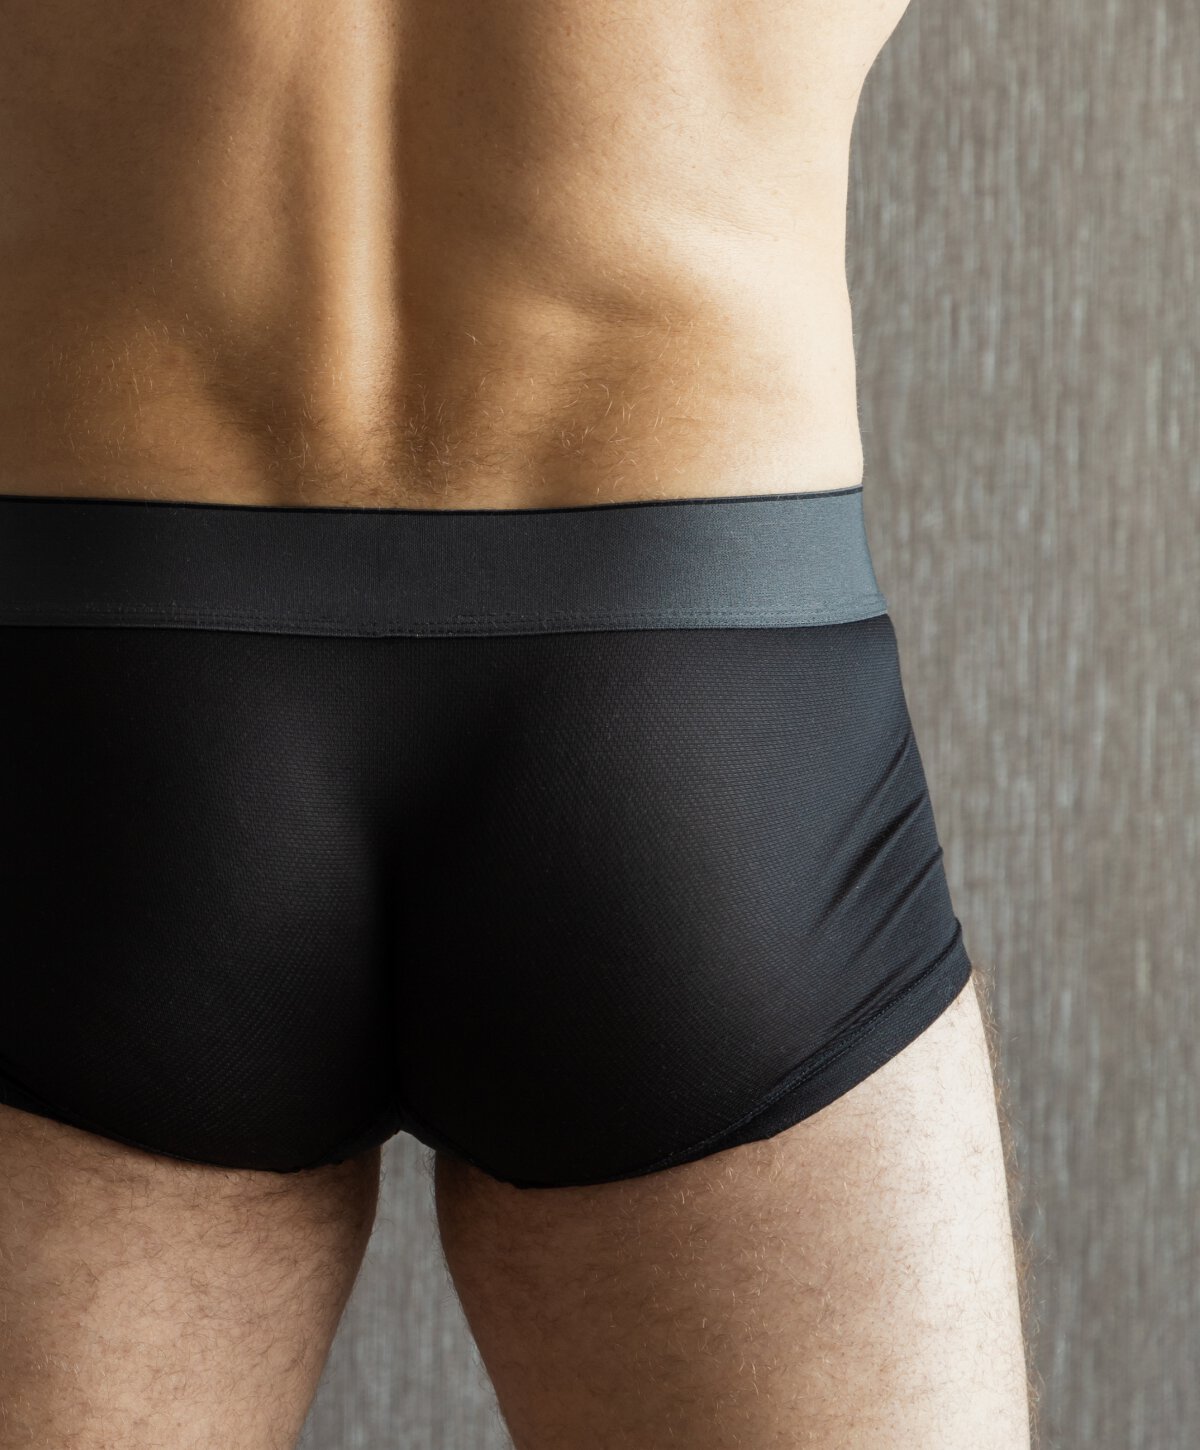 Chicago buttocks reshaping for men model with black shorts